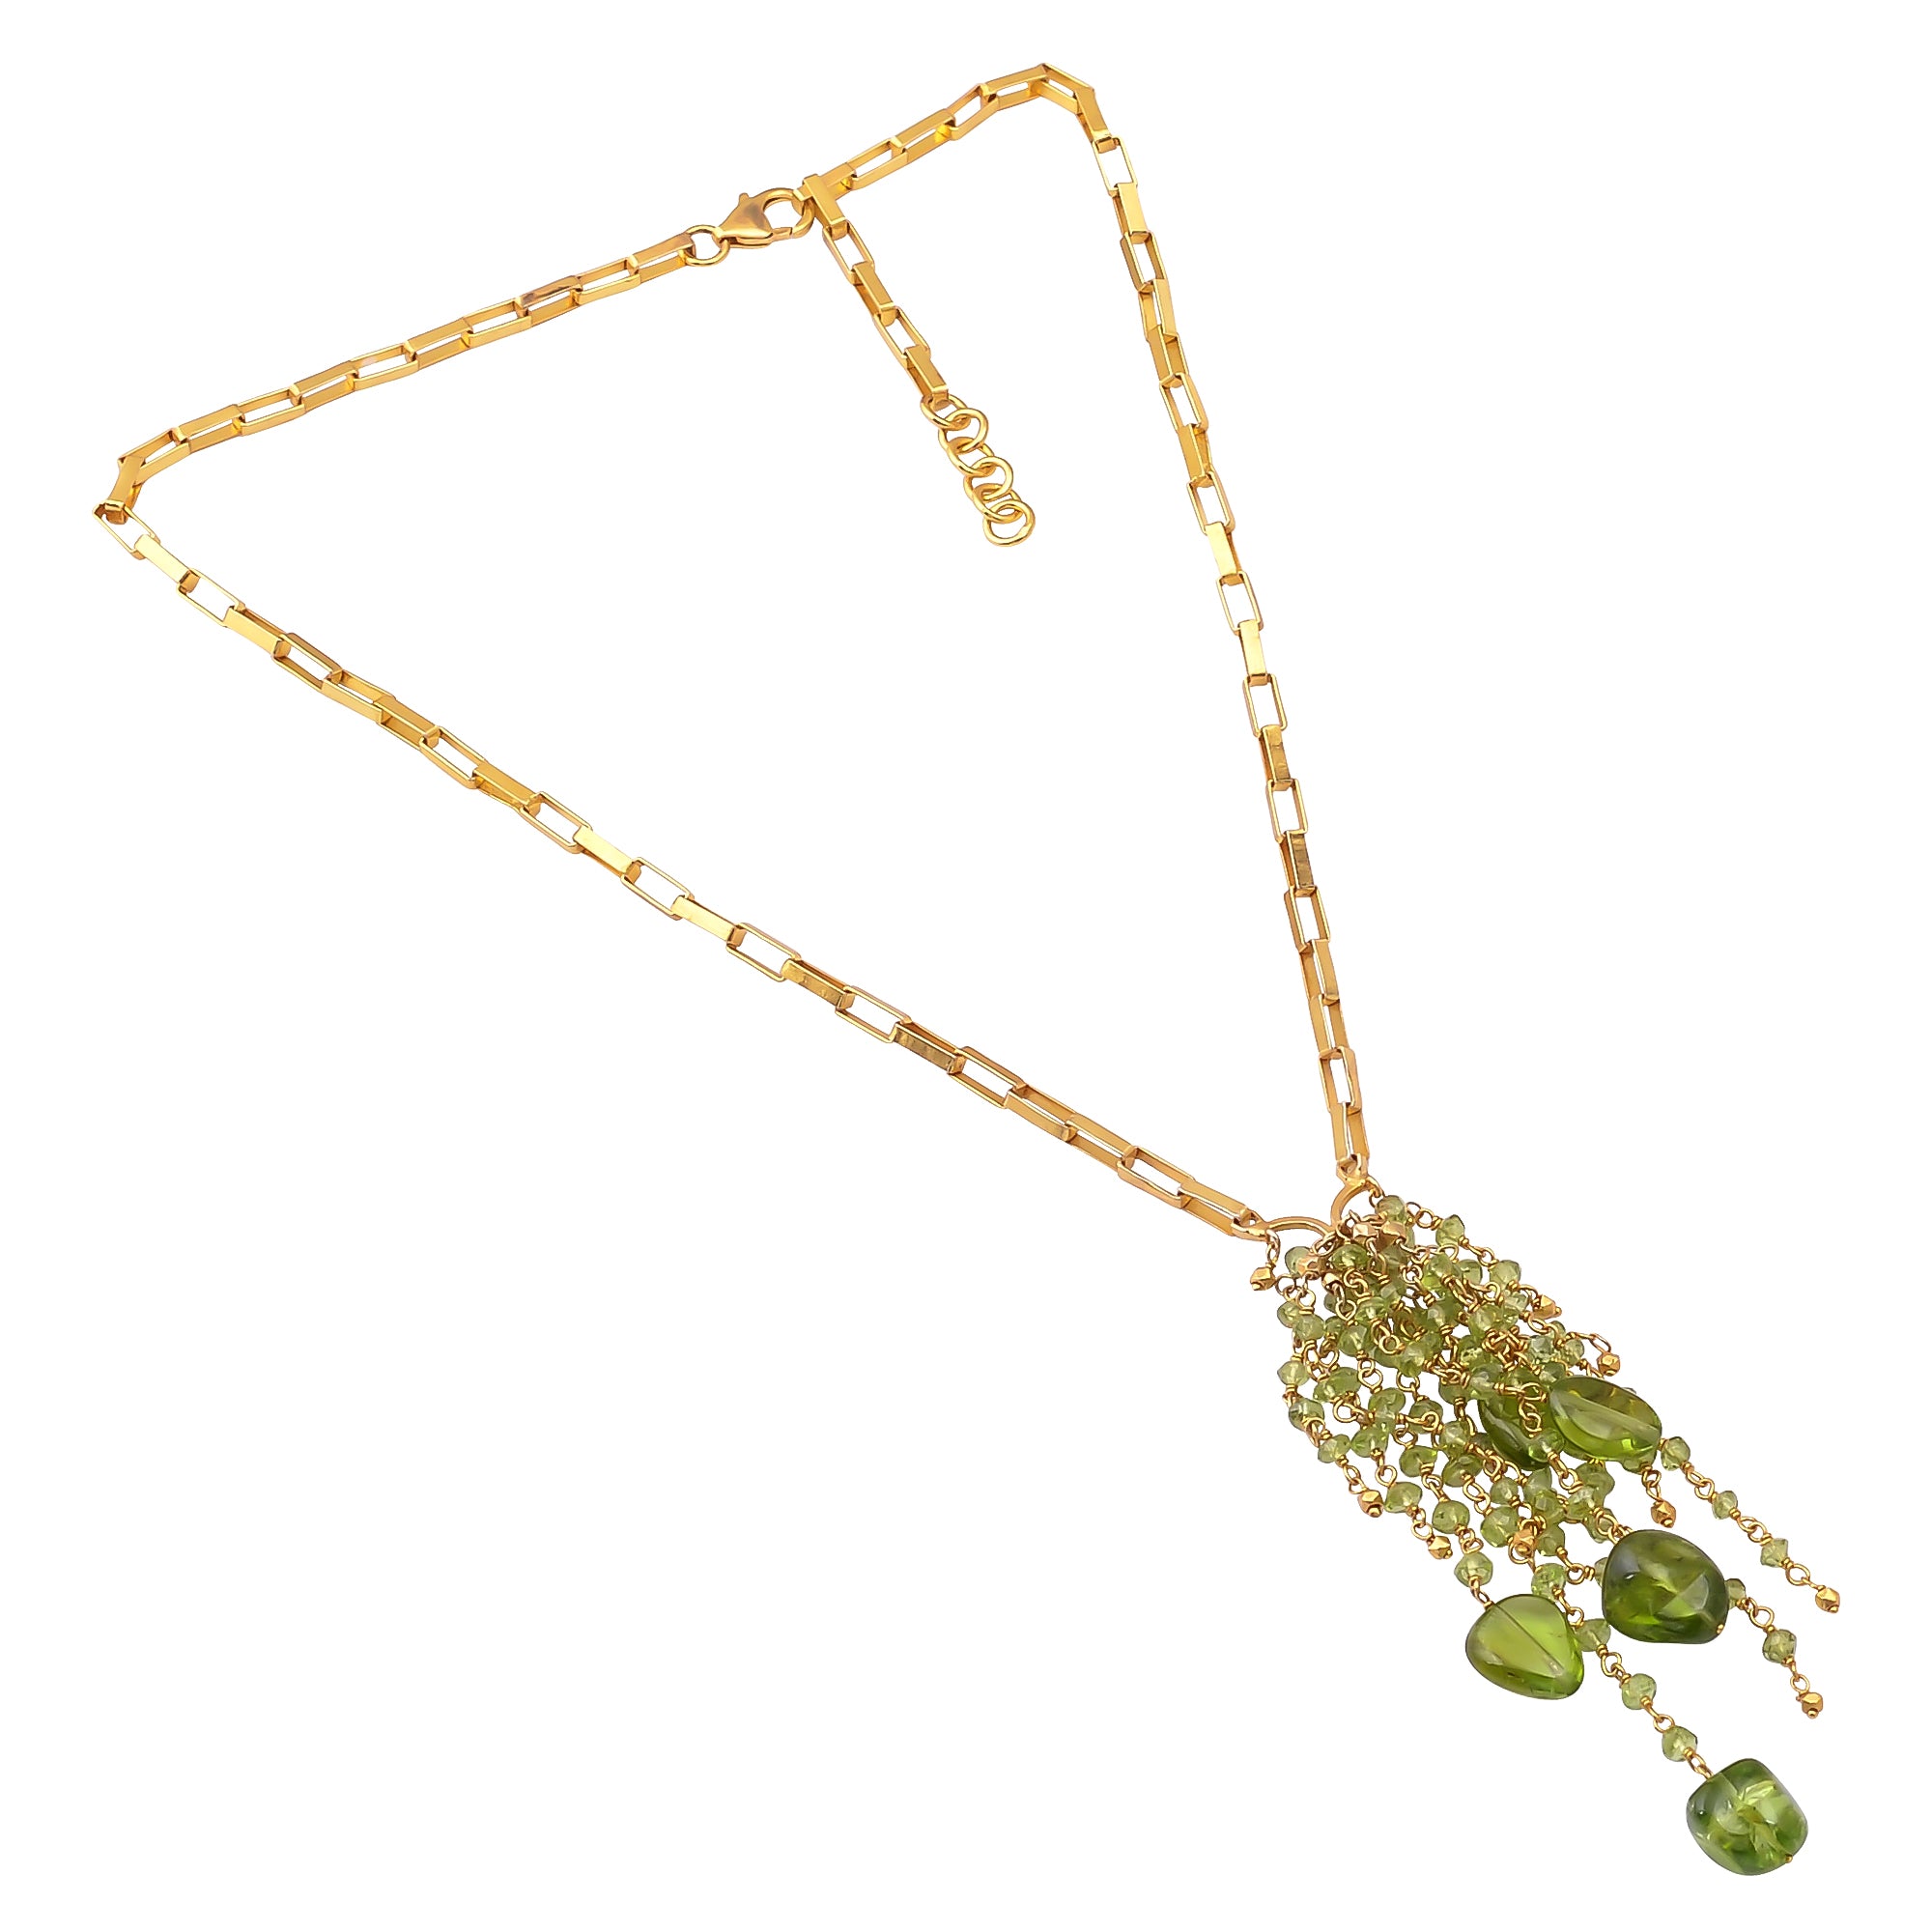 Buy Handmade Silver Gold Plated Peridot Cluster Necklace